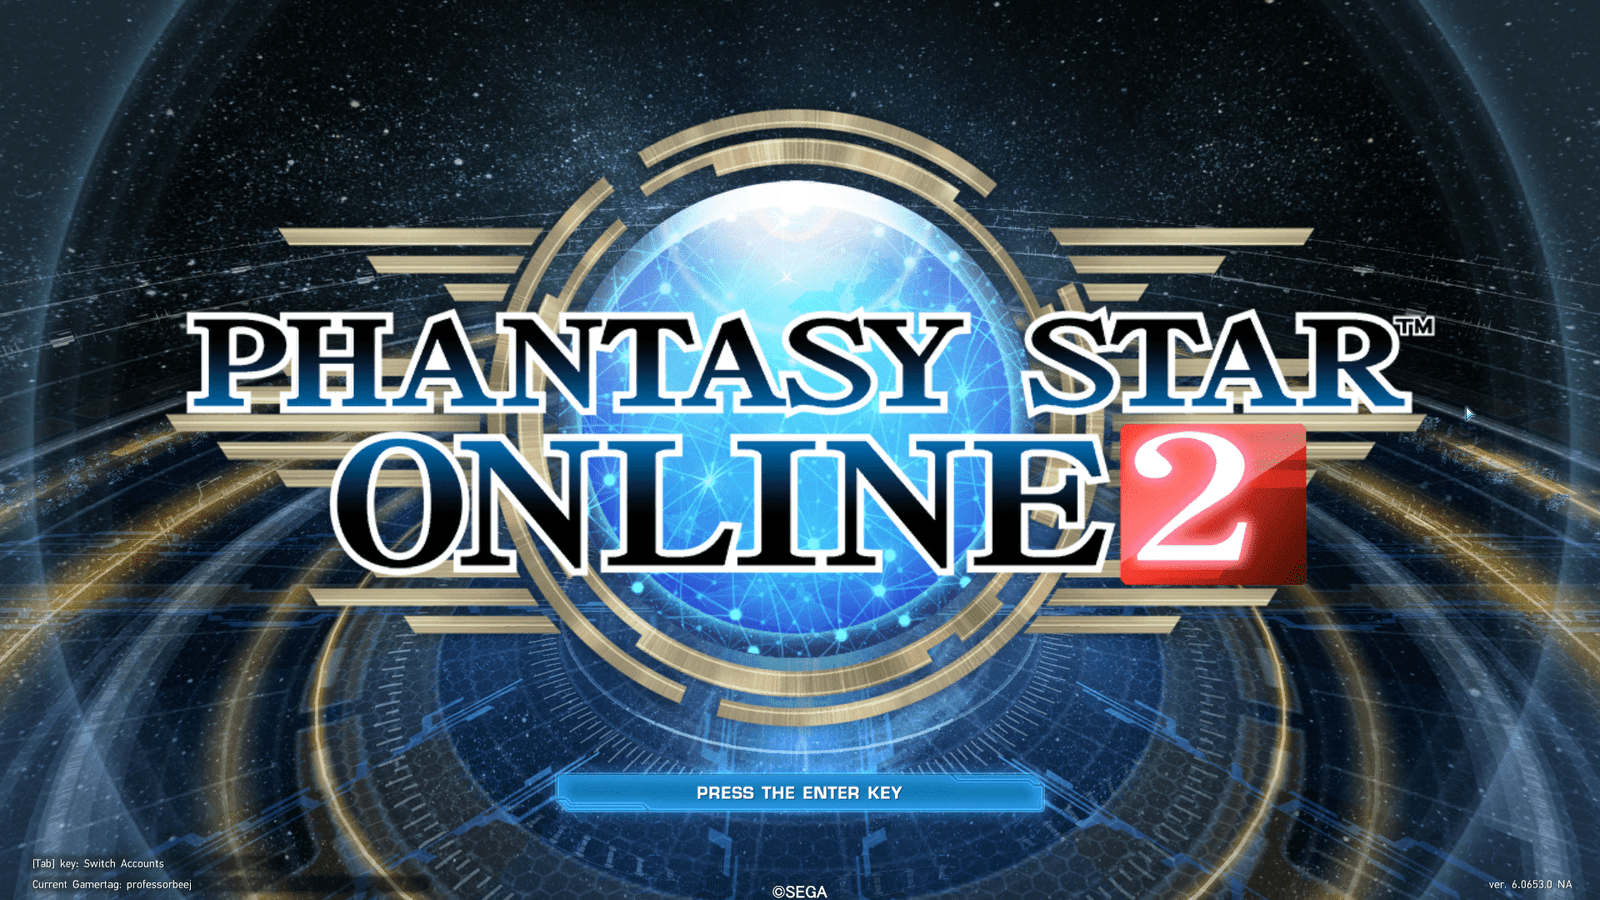 phantasy star online 2 logo and title screen